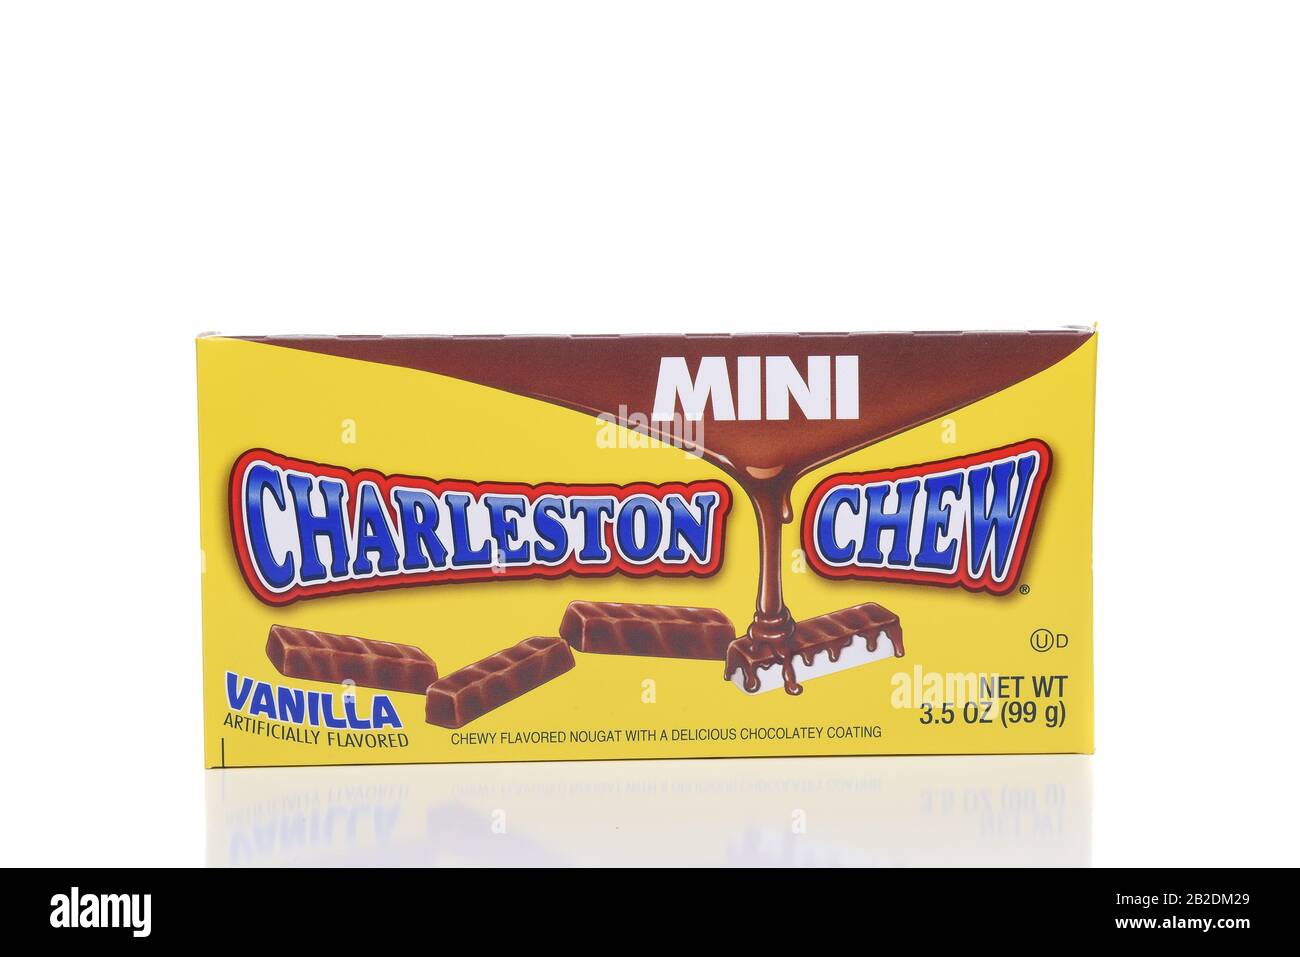 IRVINE, CALIFORNIA - AUGUST 21, 2017:  Charleston Chew Mini. Charleston Chew, created in 1925,  is a candy bar consisting of flavored nougat covered i Stock Photo